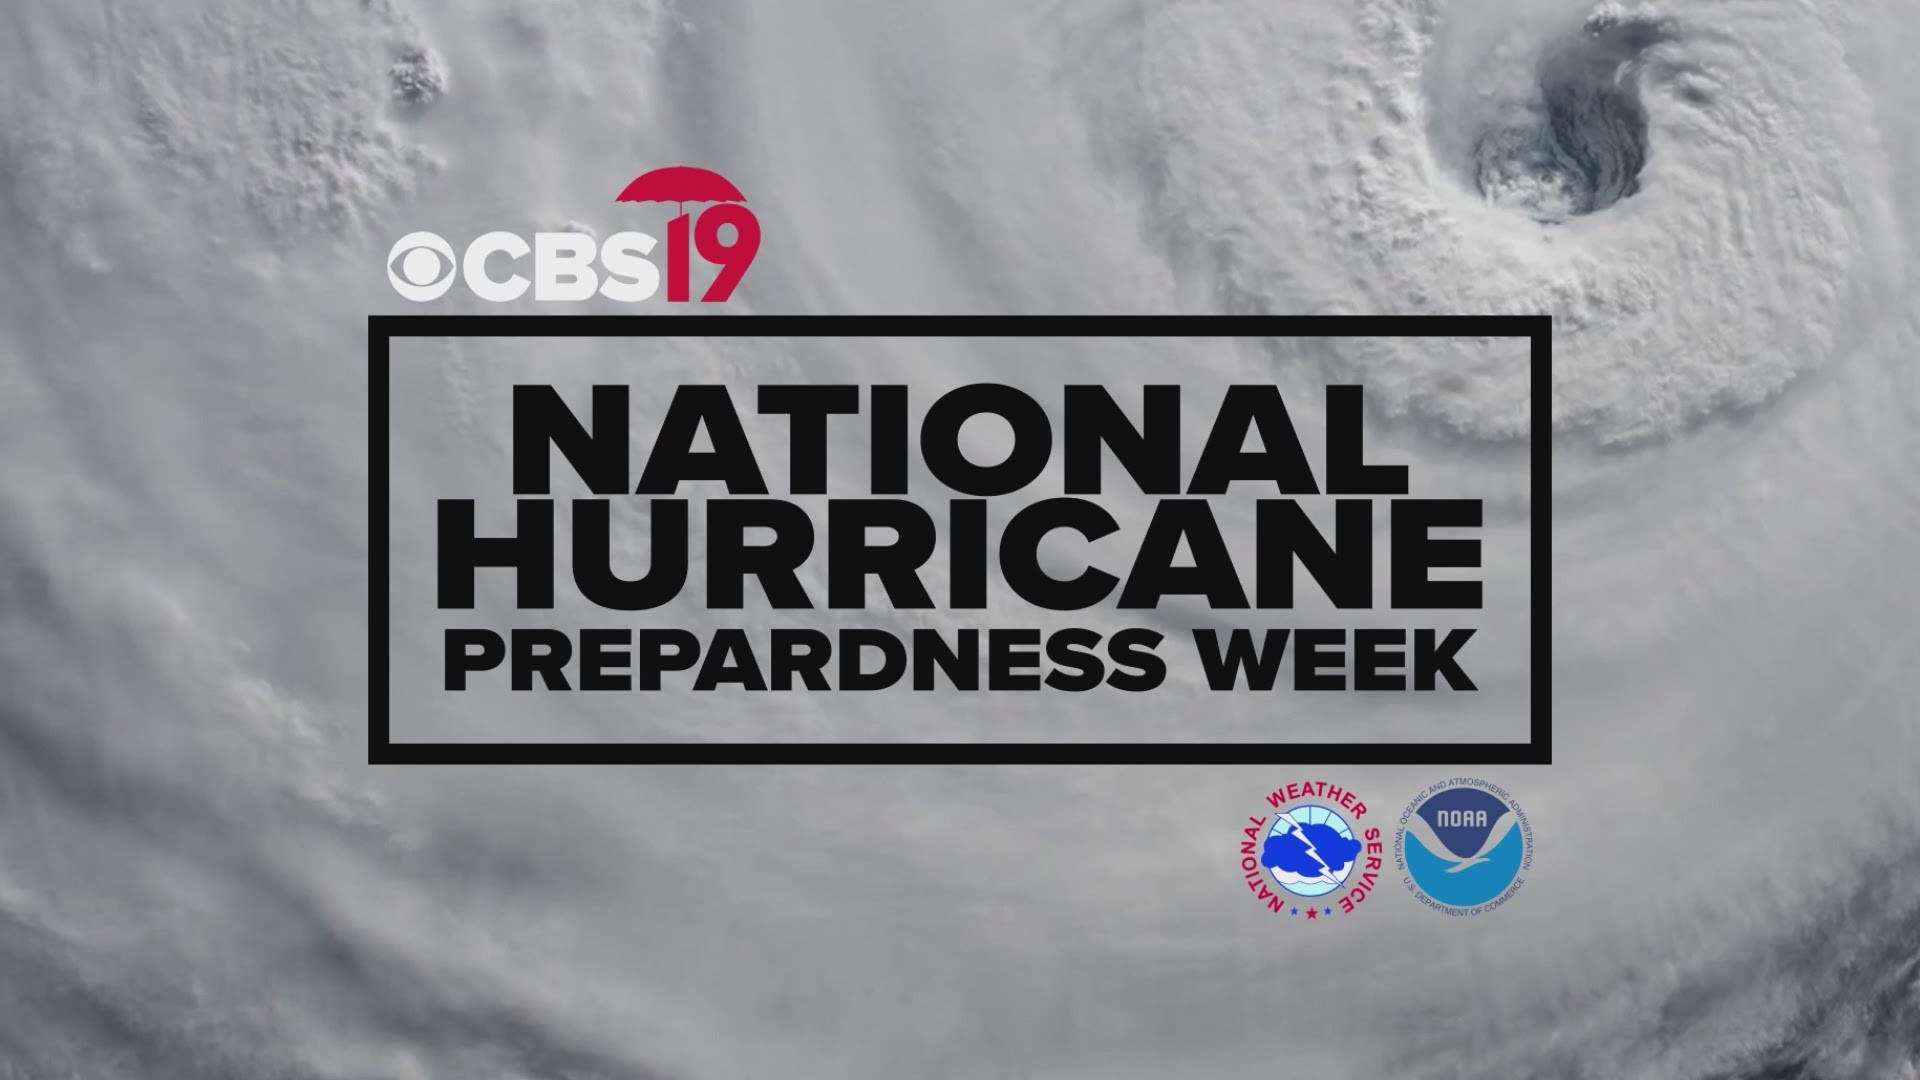 Hurricane preparedness week is from May 9th to May 15th here are items you should gather for a safety kit